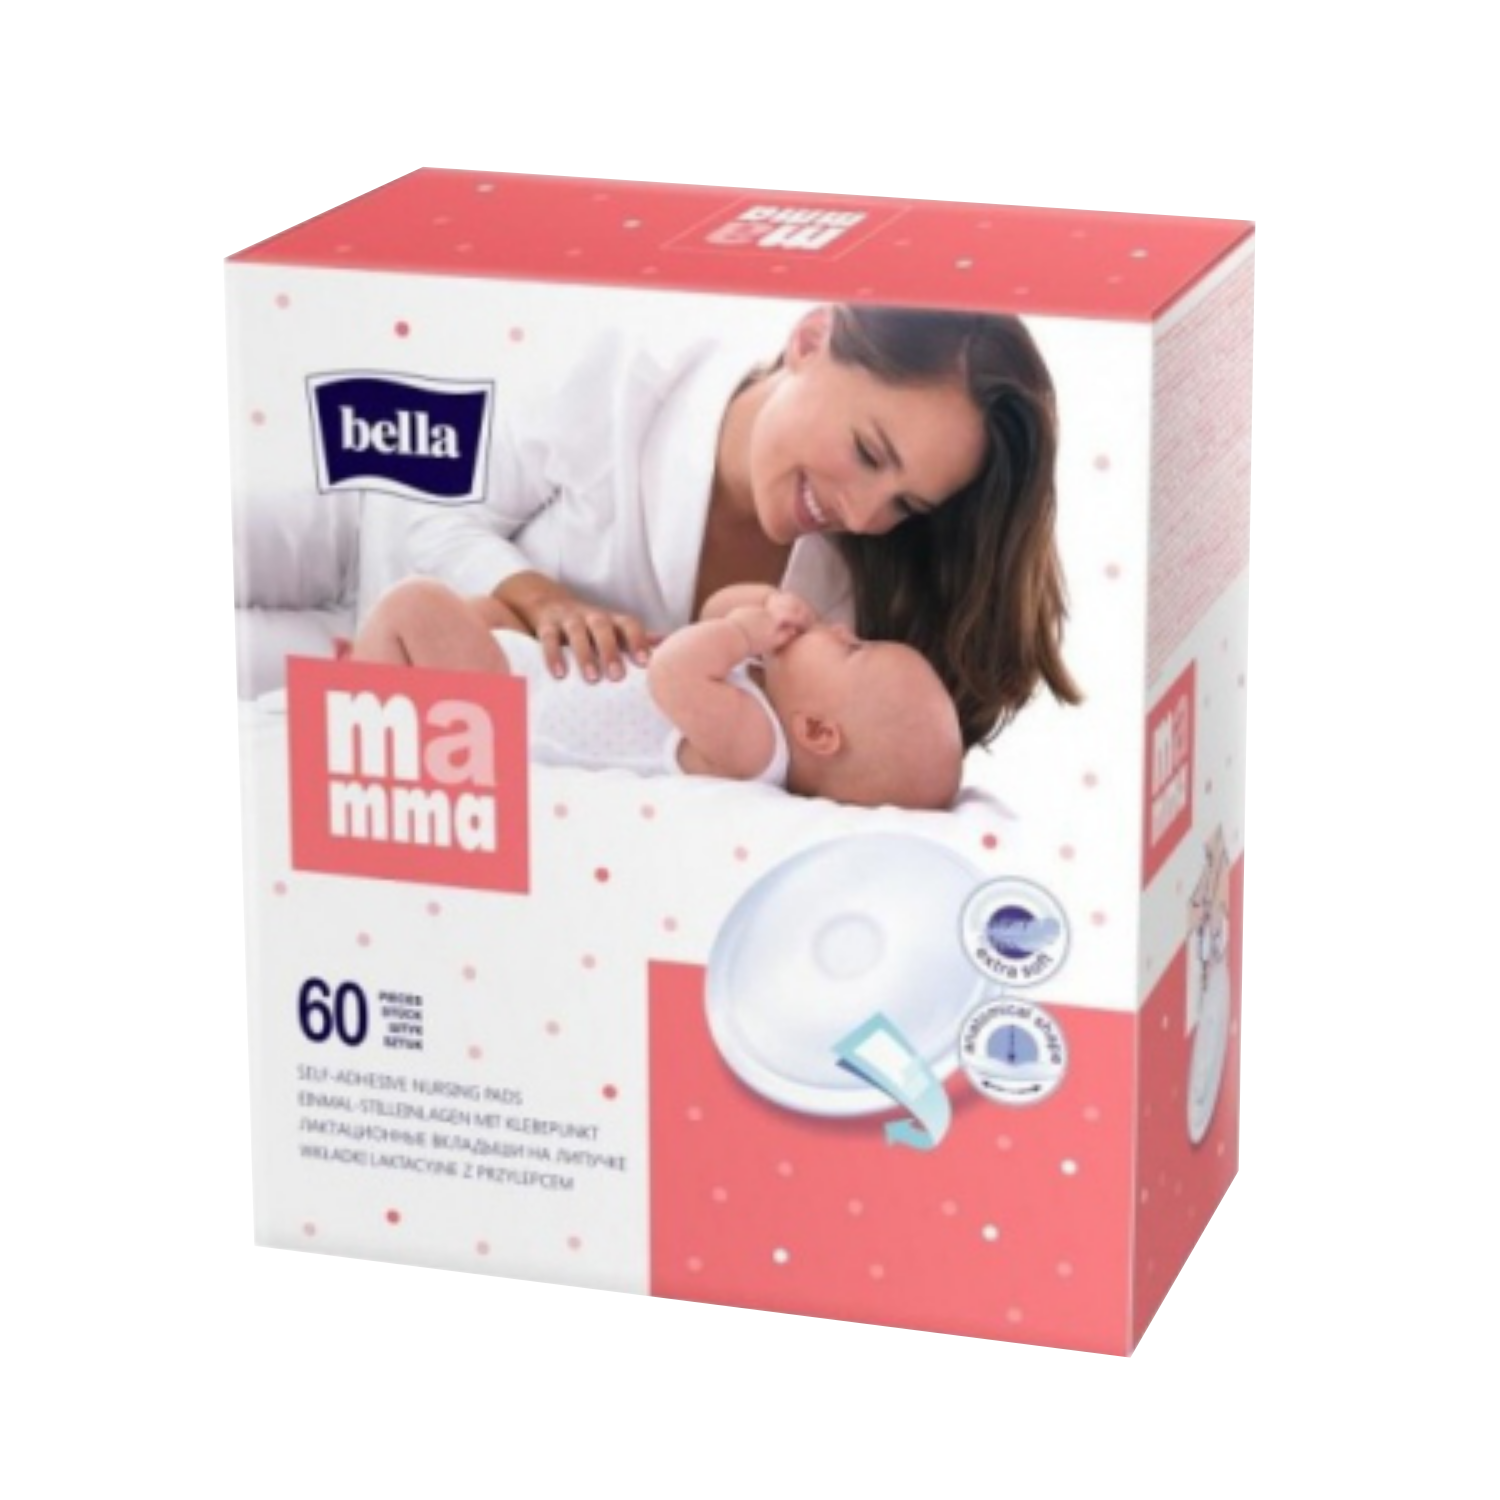 Bella MAMMA lactation pads with Velcro, 60 pcs. Economy in cart.